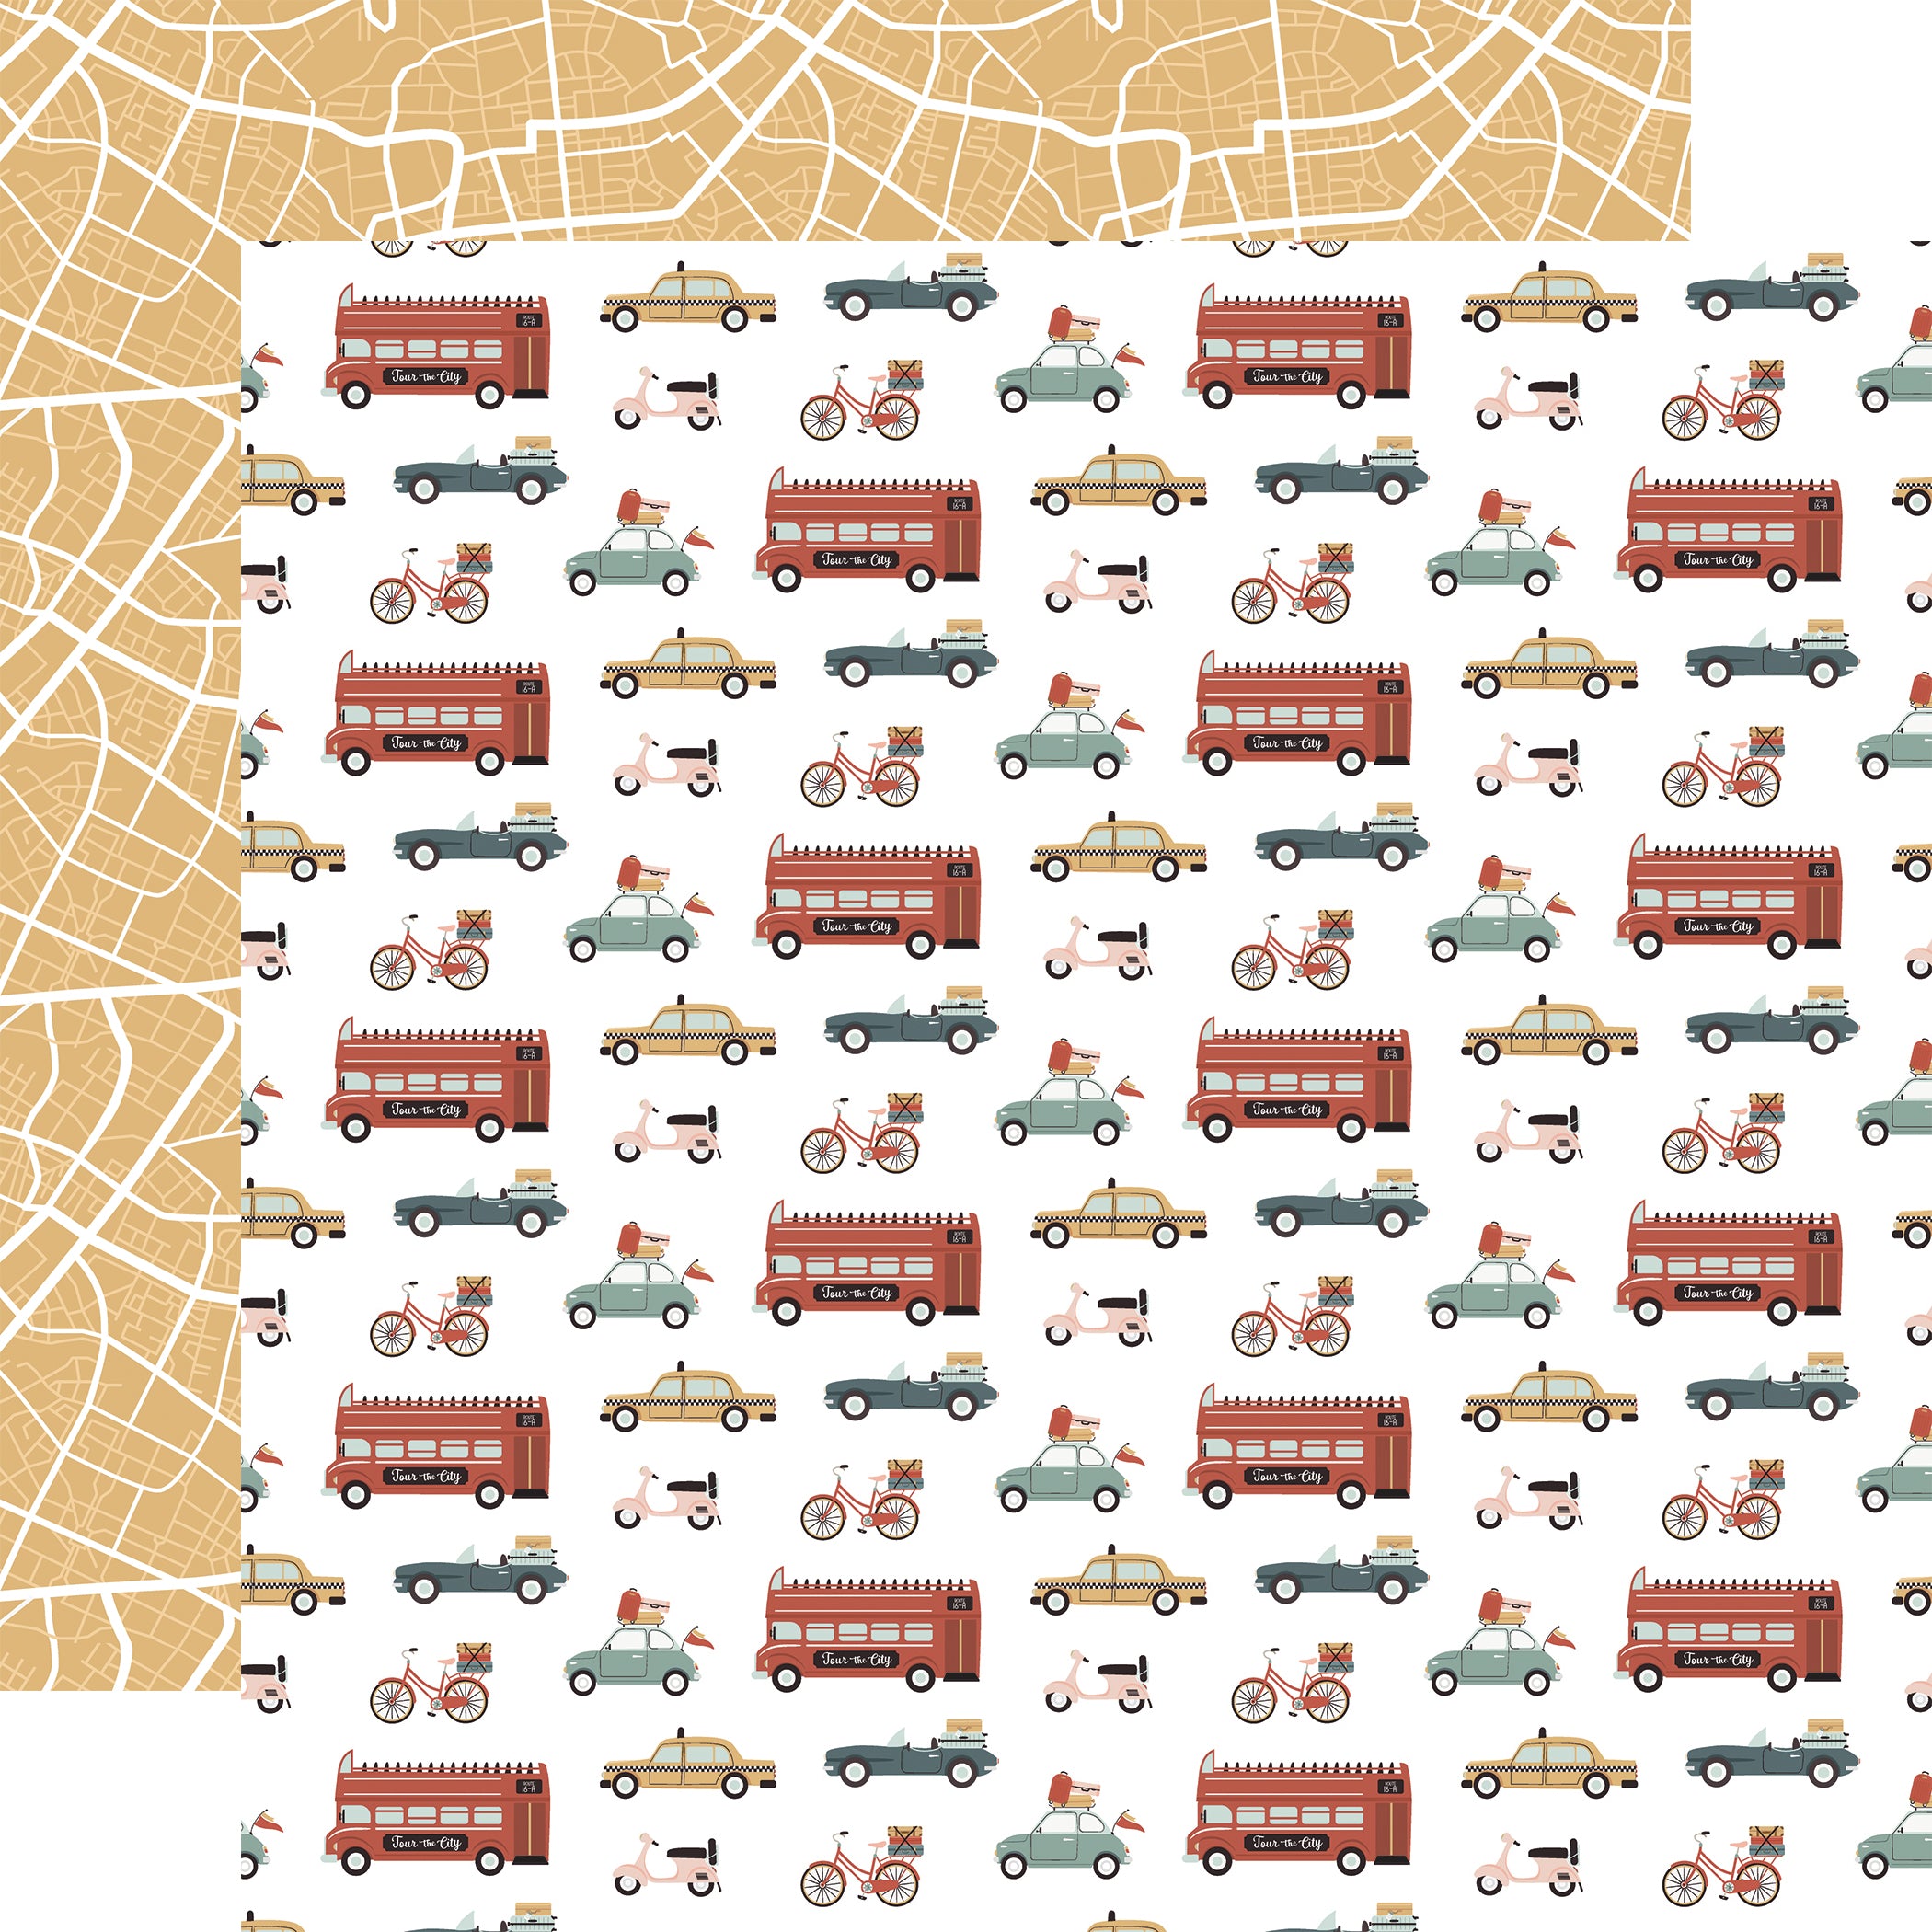 Let's Take the Trip Collection Touring Transportation 12 x 12 Double-Sided Scrapbook Paper by Echo Park Paper